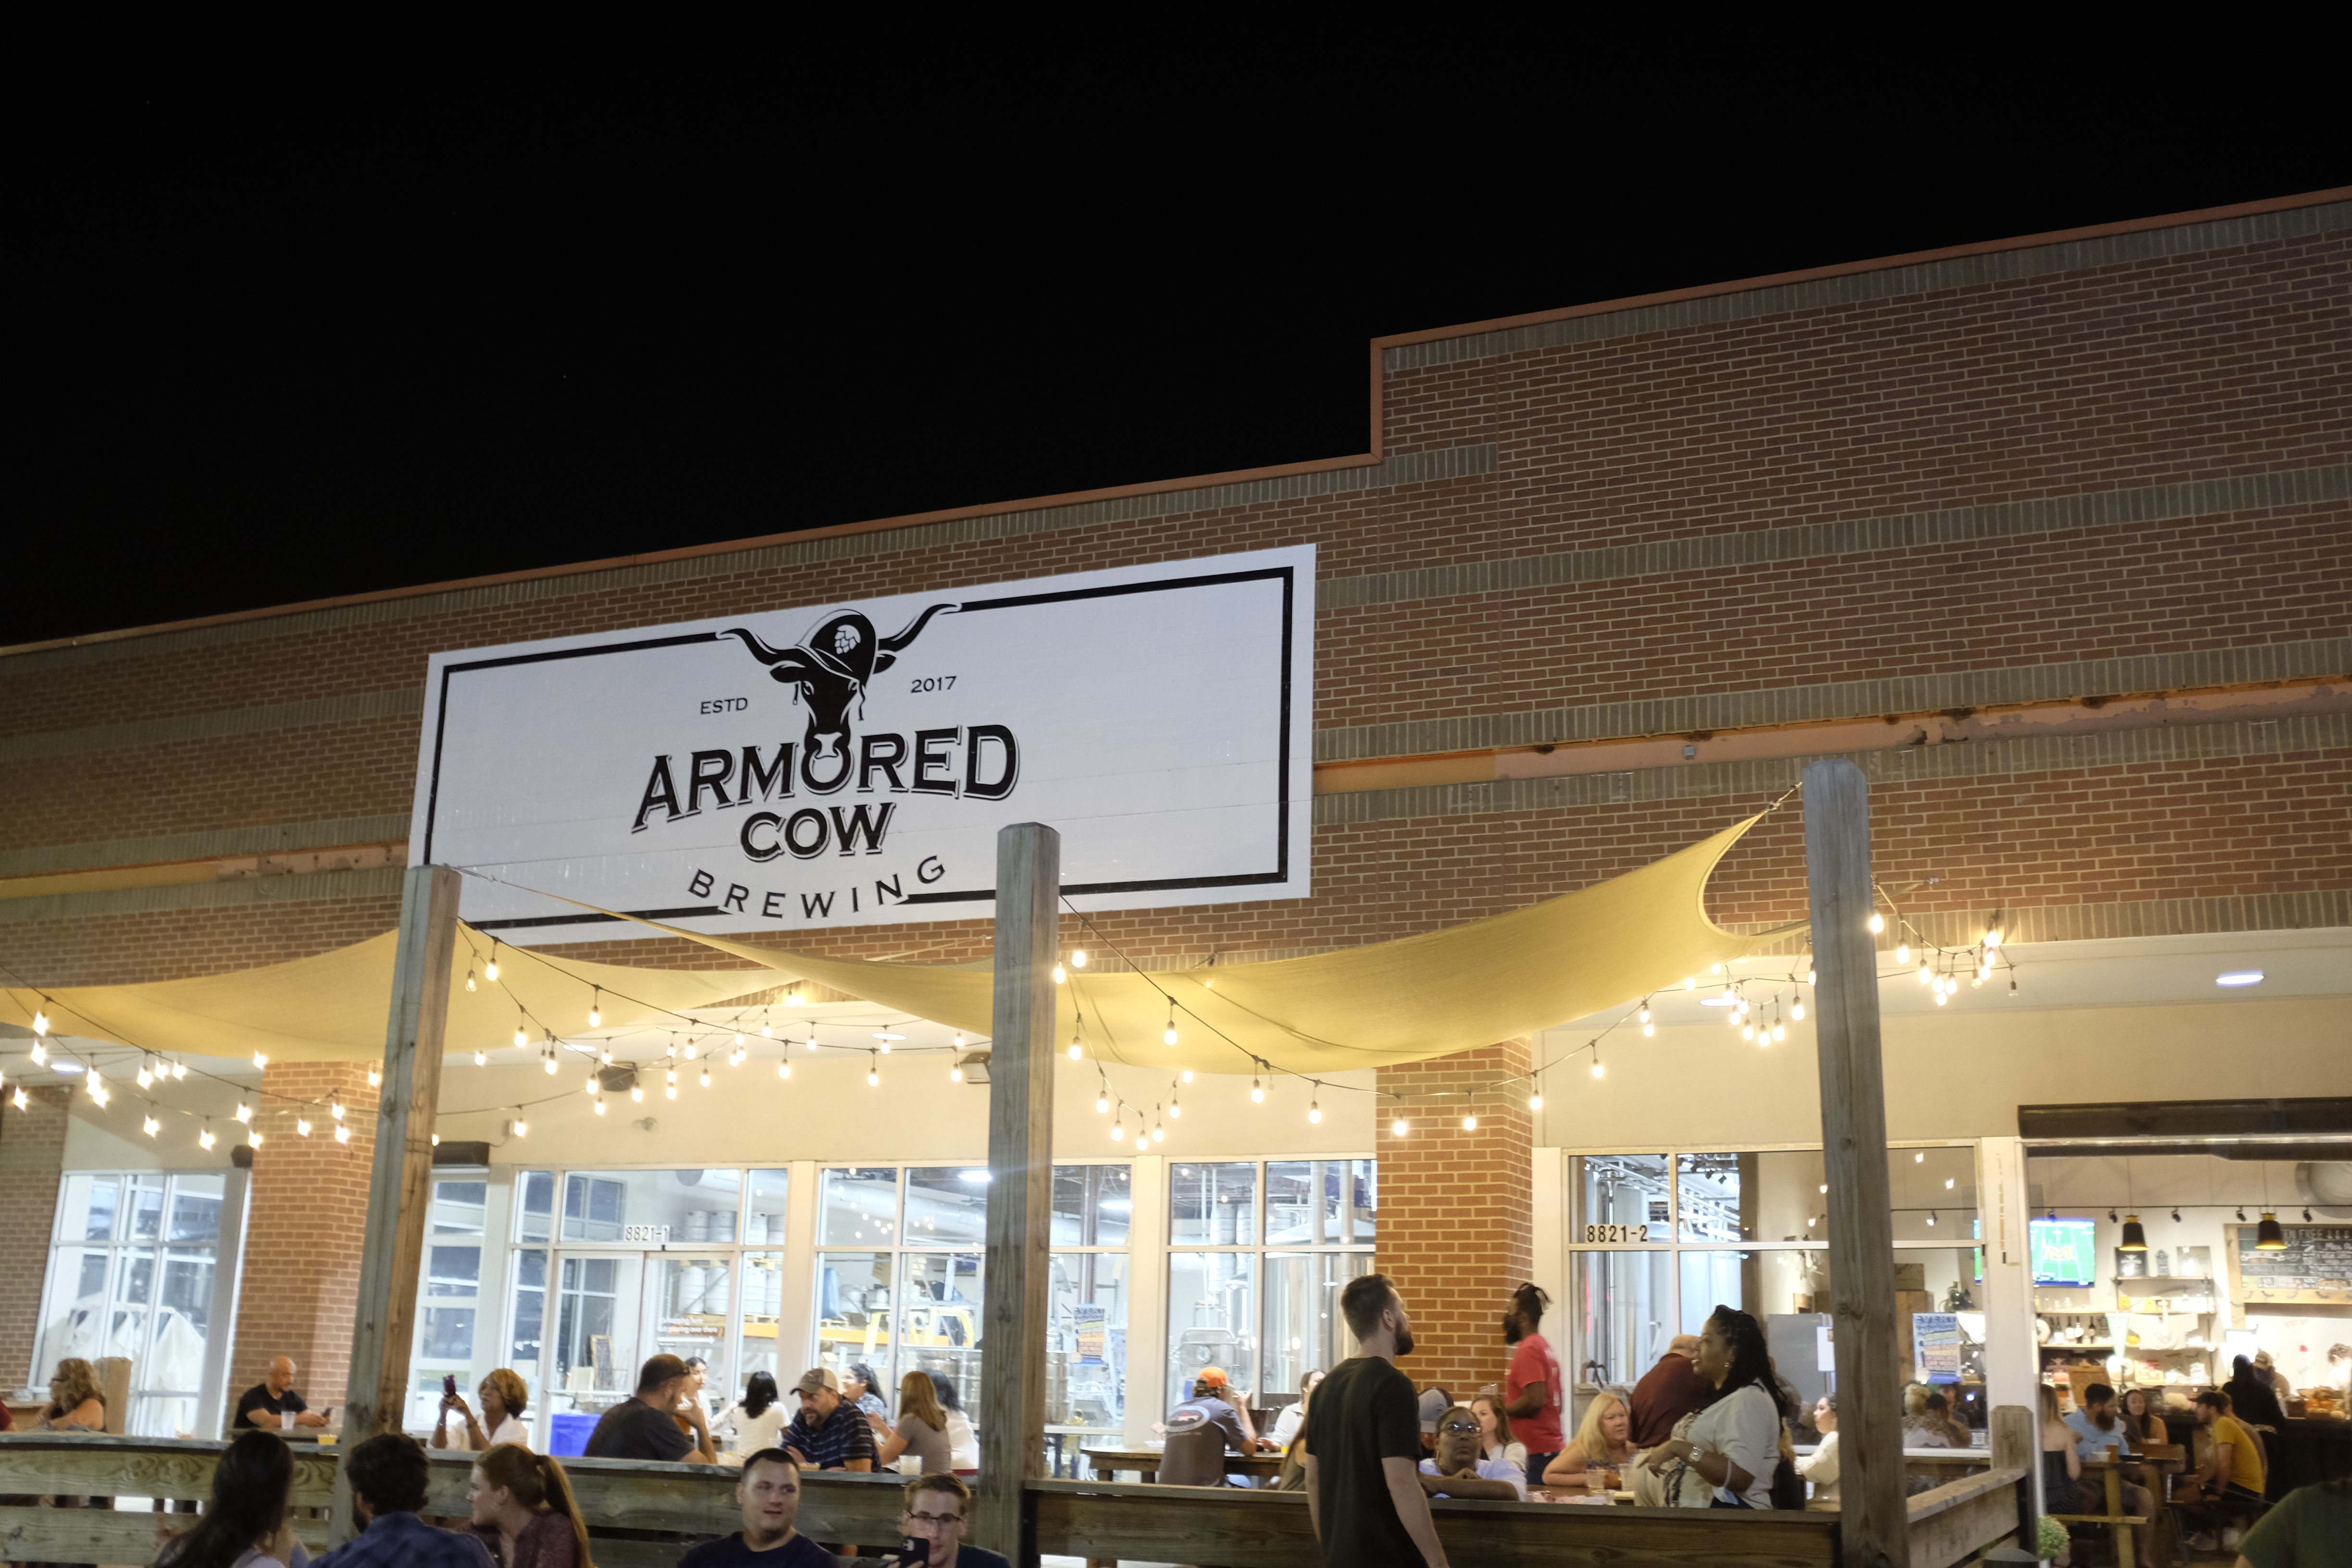 Exterior of Armored Cow Brewing; there are people sitting under canopies with string lights in front of a brick building.